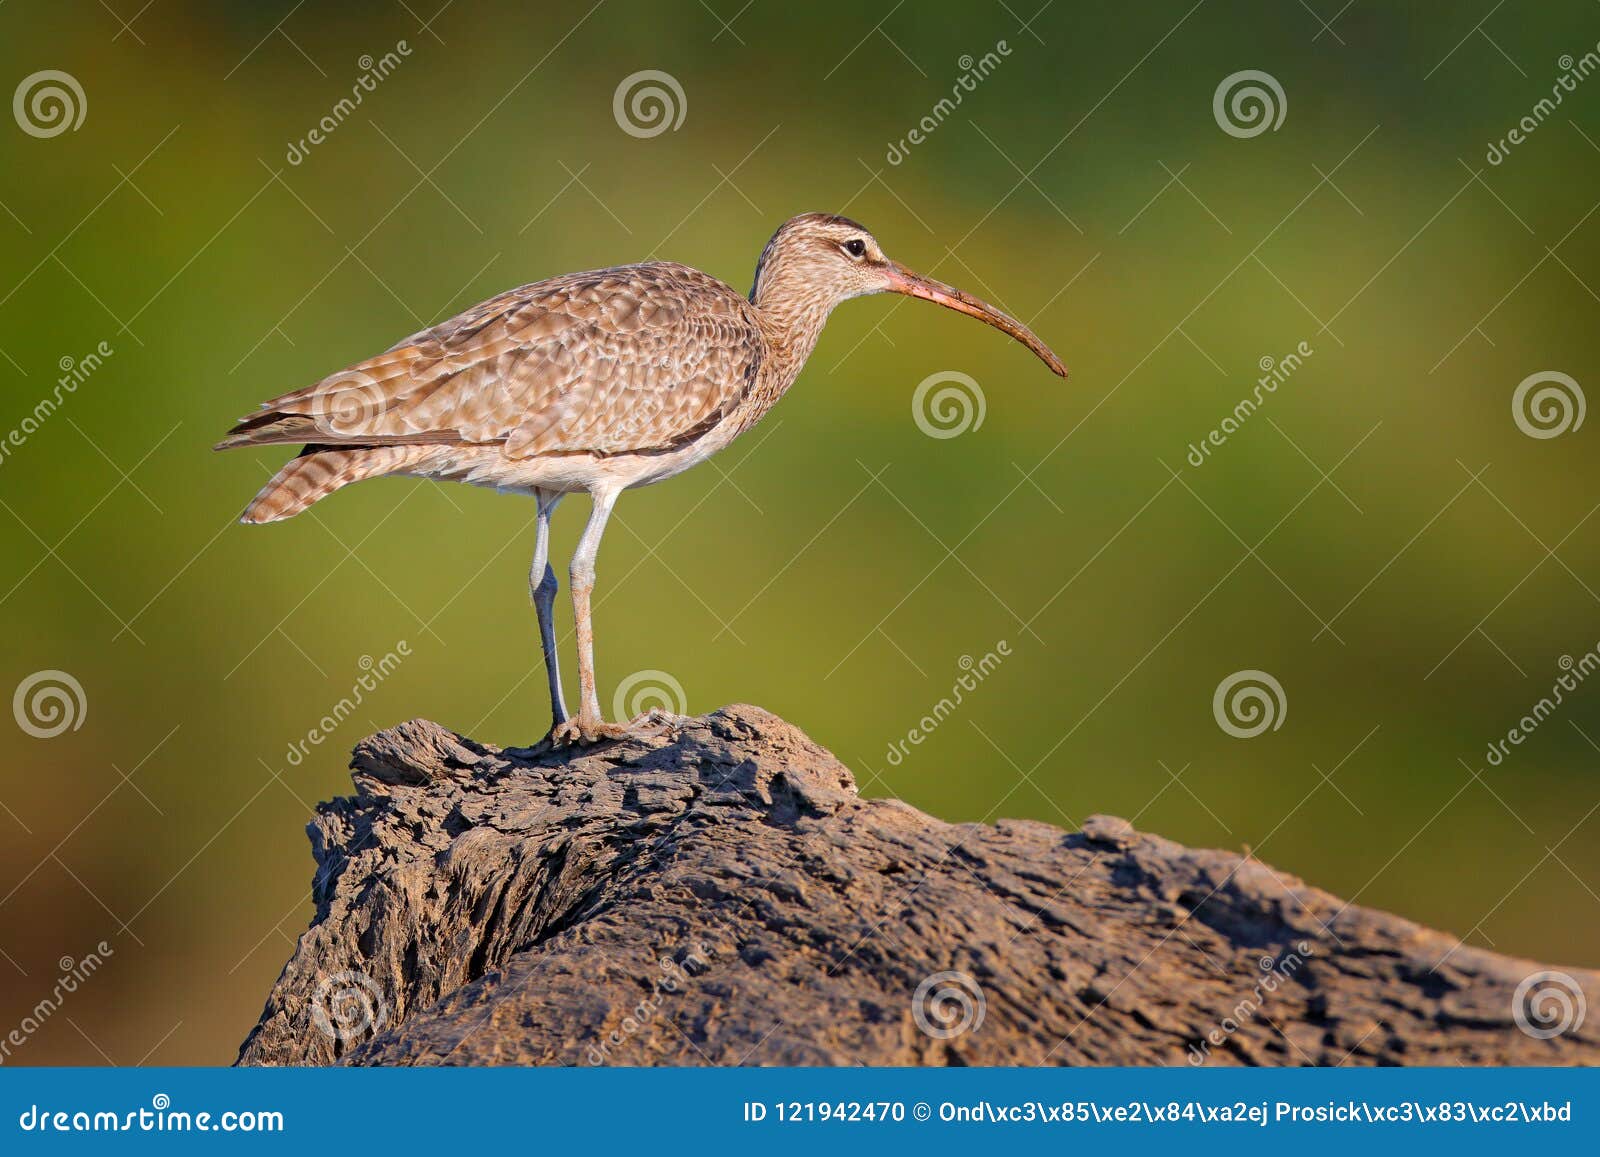 whimbrel, numenius phaeopus on the tree trunk, walking in the nature forest habitat. wader bird with curved bill.